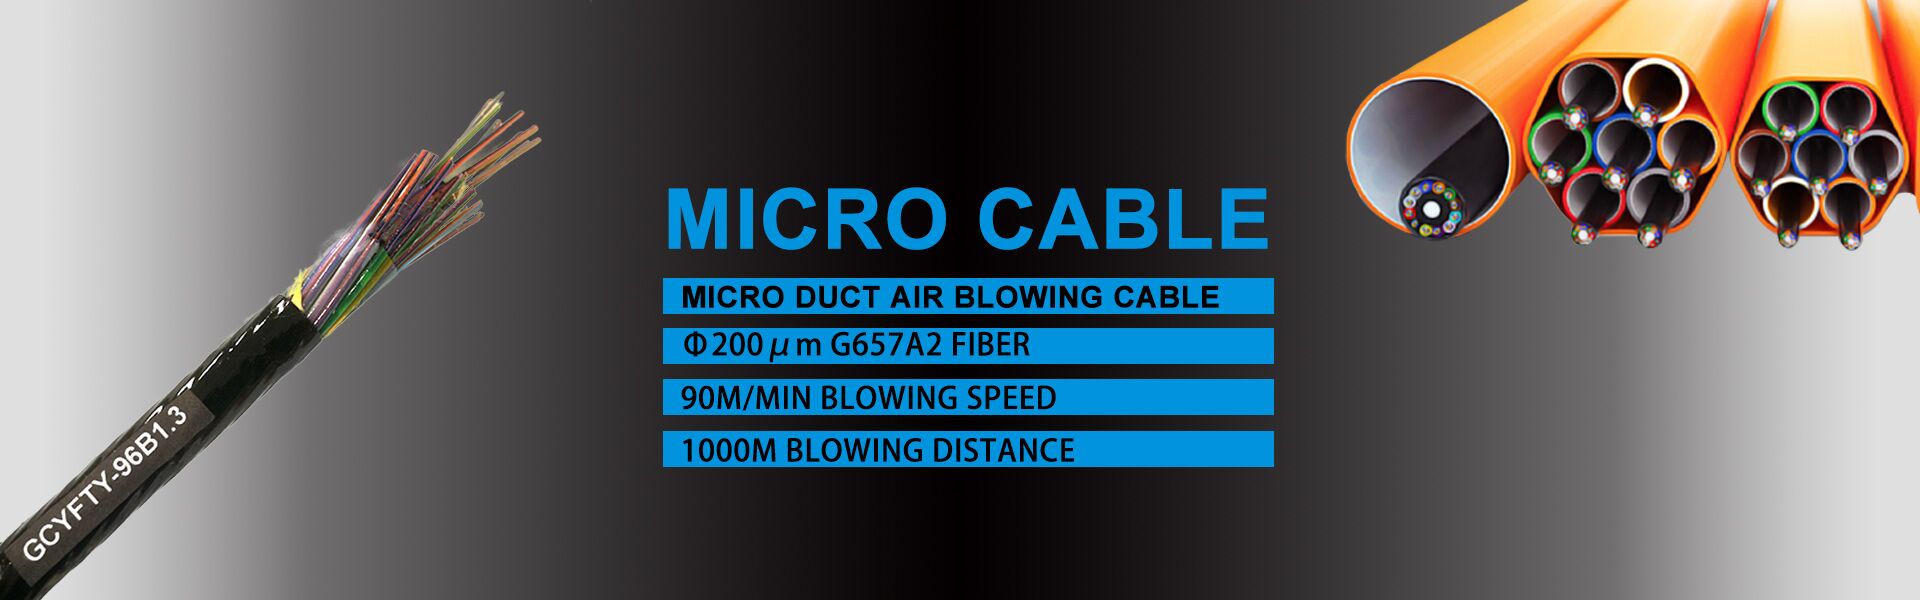 Air Blowing Micro Cable